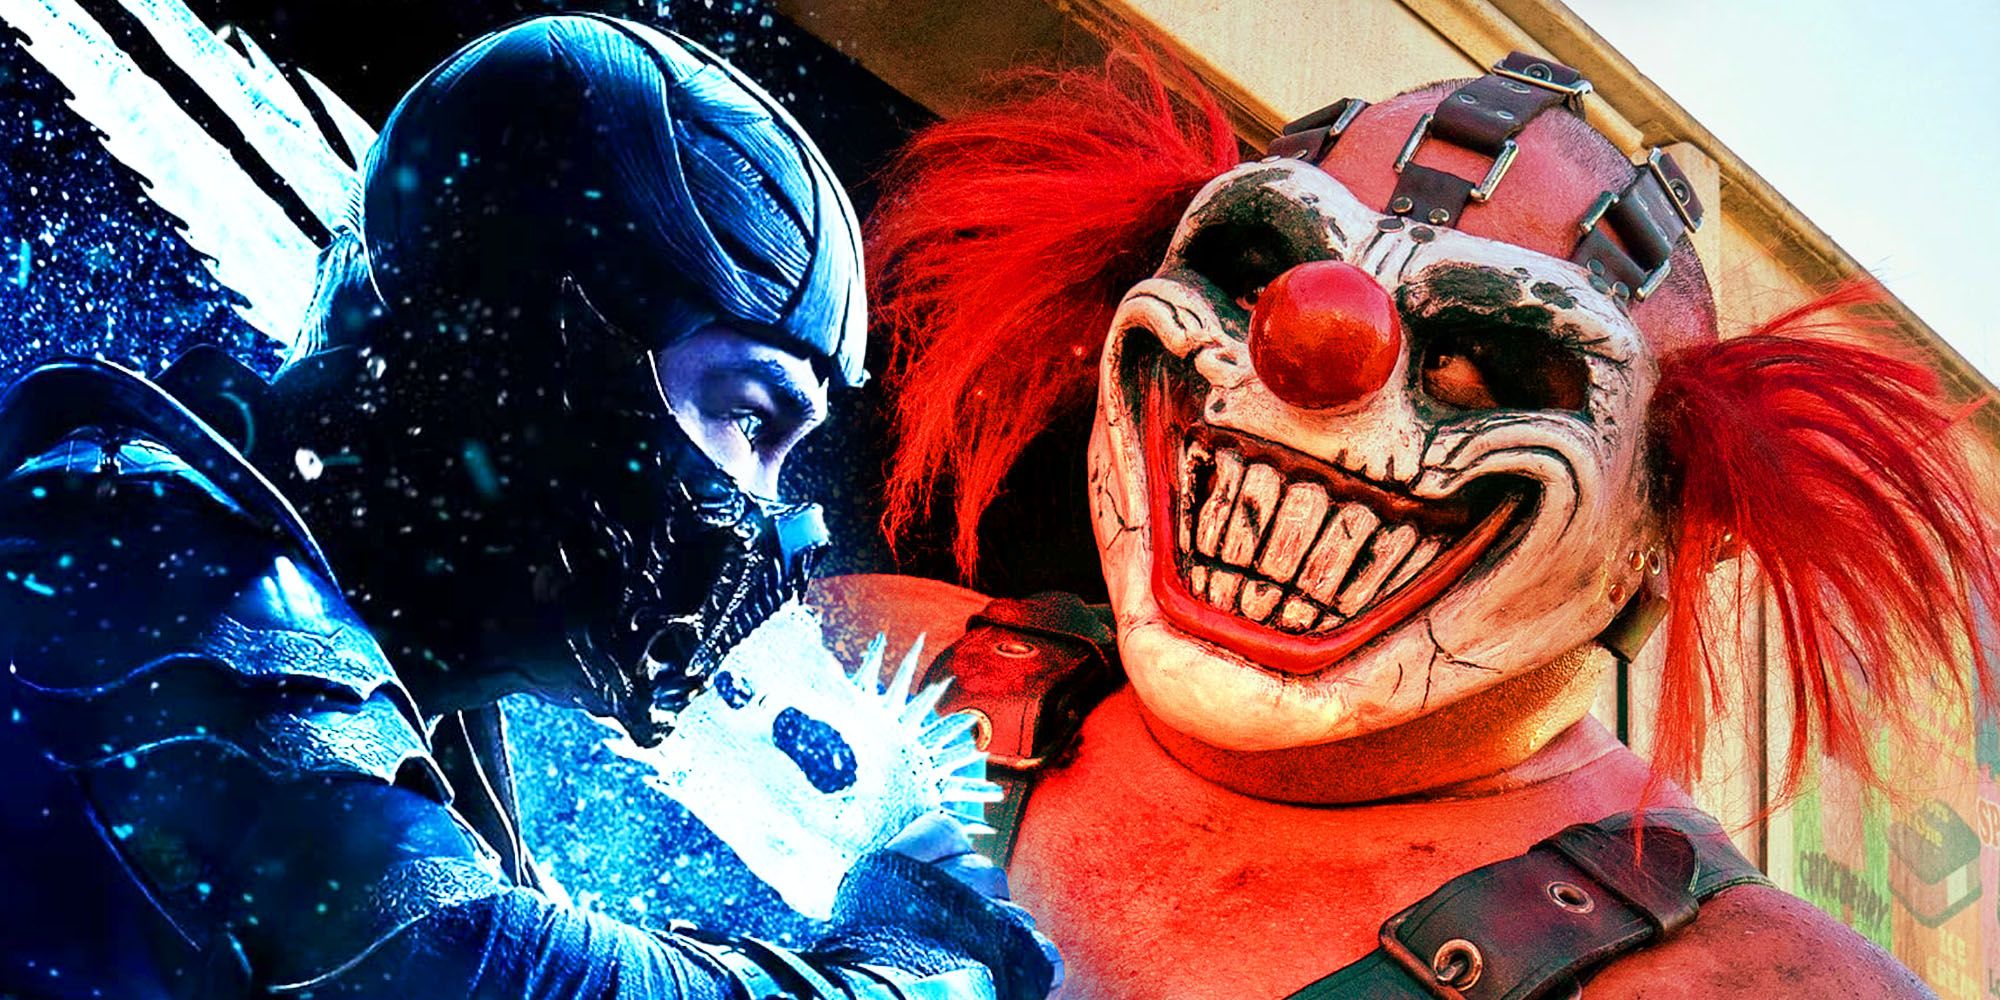 Every Twisted Metal Video Game Character Teased For Calypso's Tournament